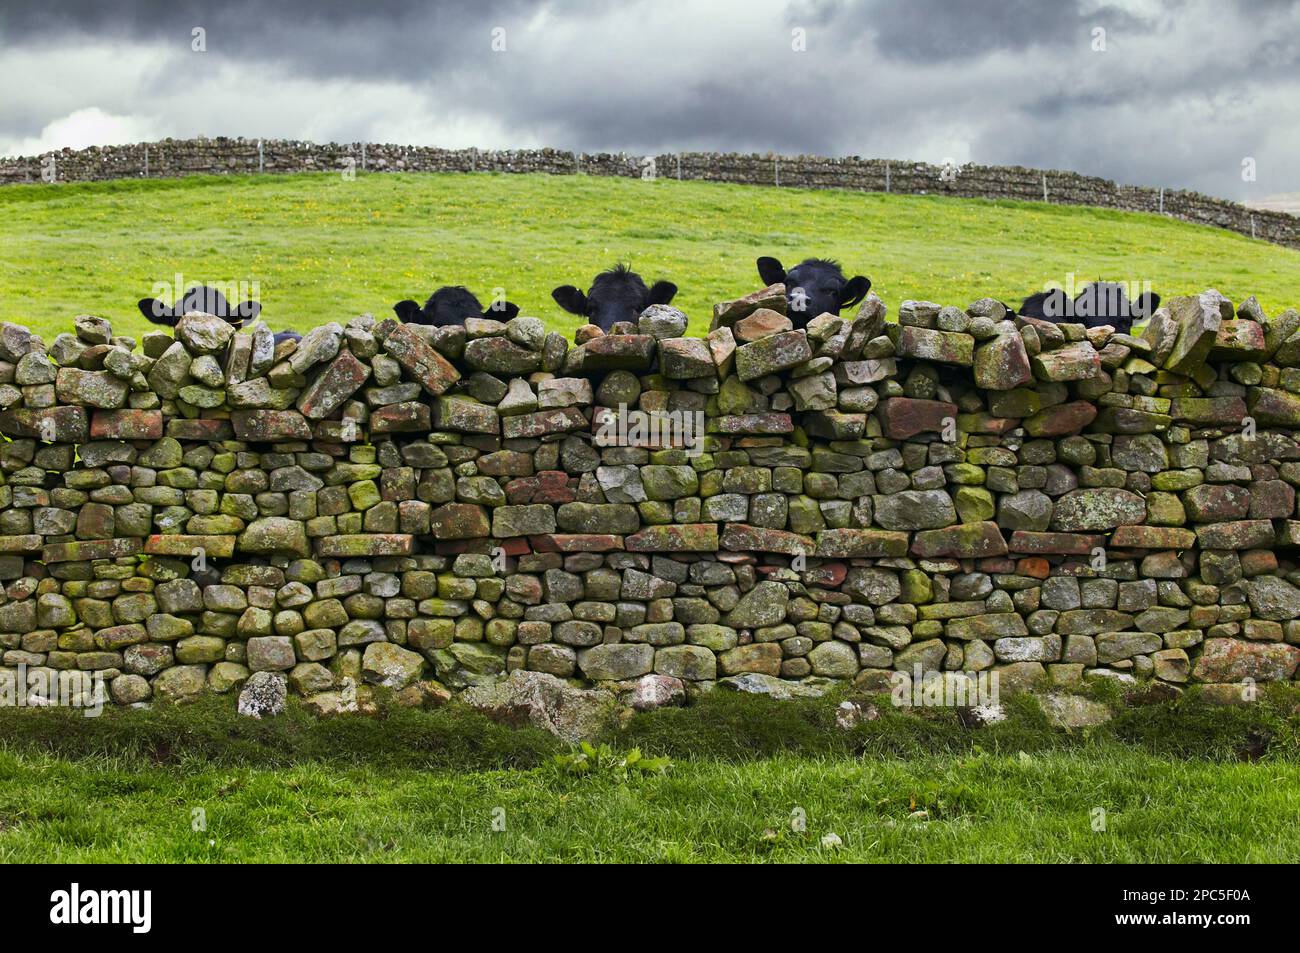 Aberdeen Angus beef animals look over  dry stone wall Stock Photo